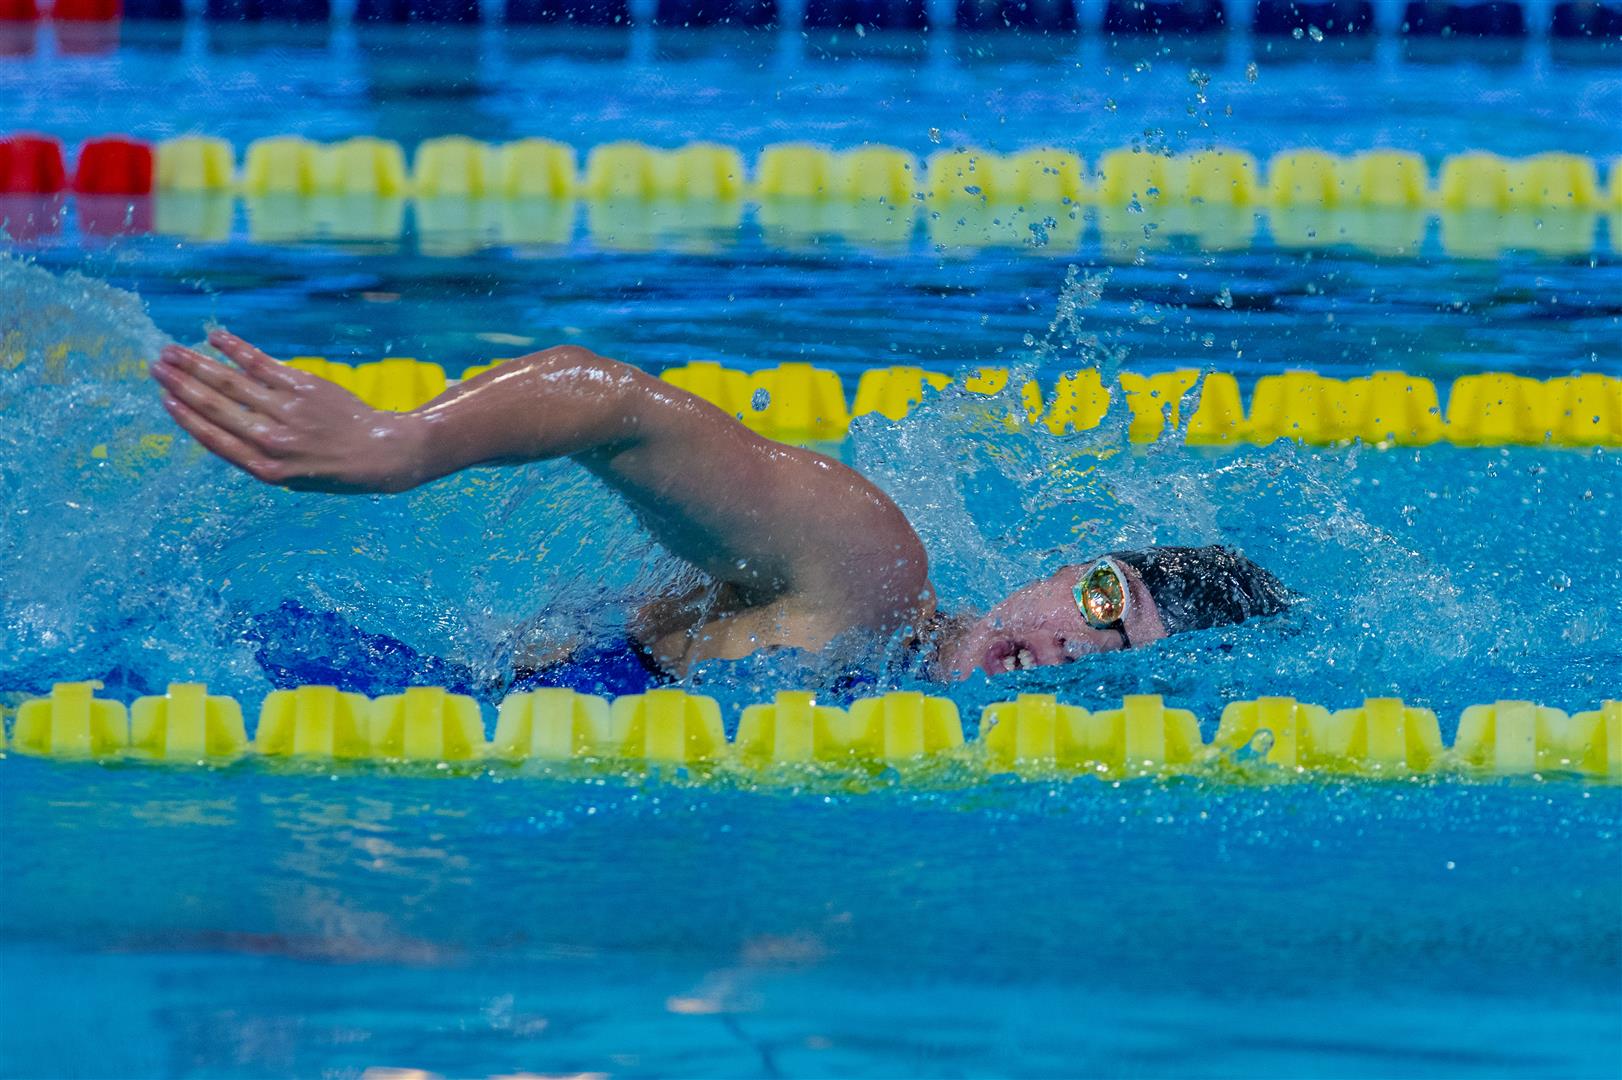 Nora Meister at the European Swimming Championships in Funchal in 2021.